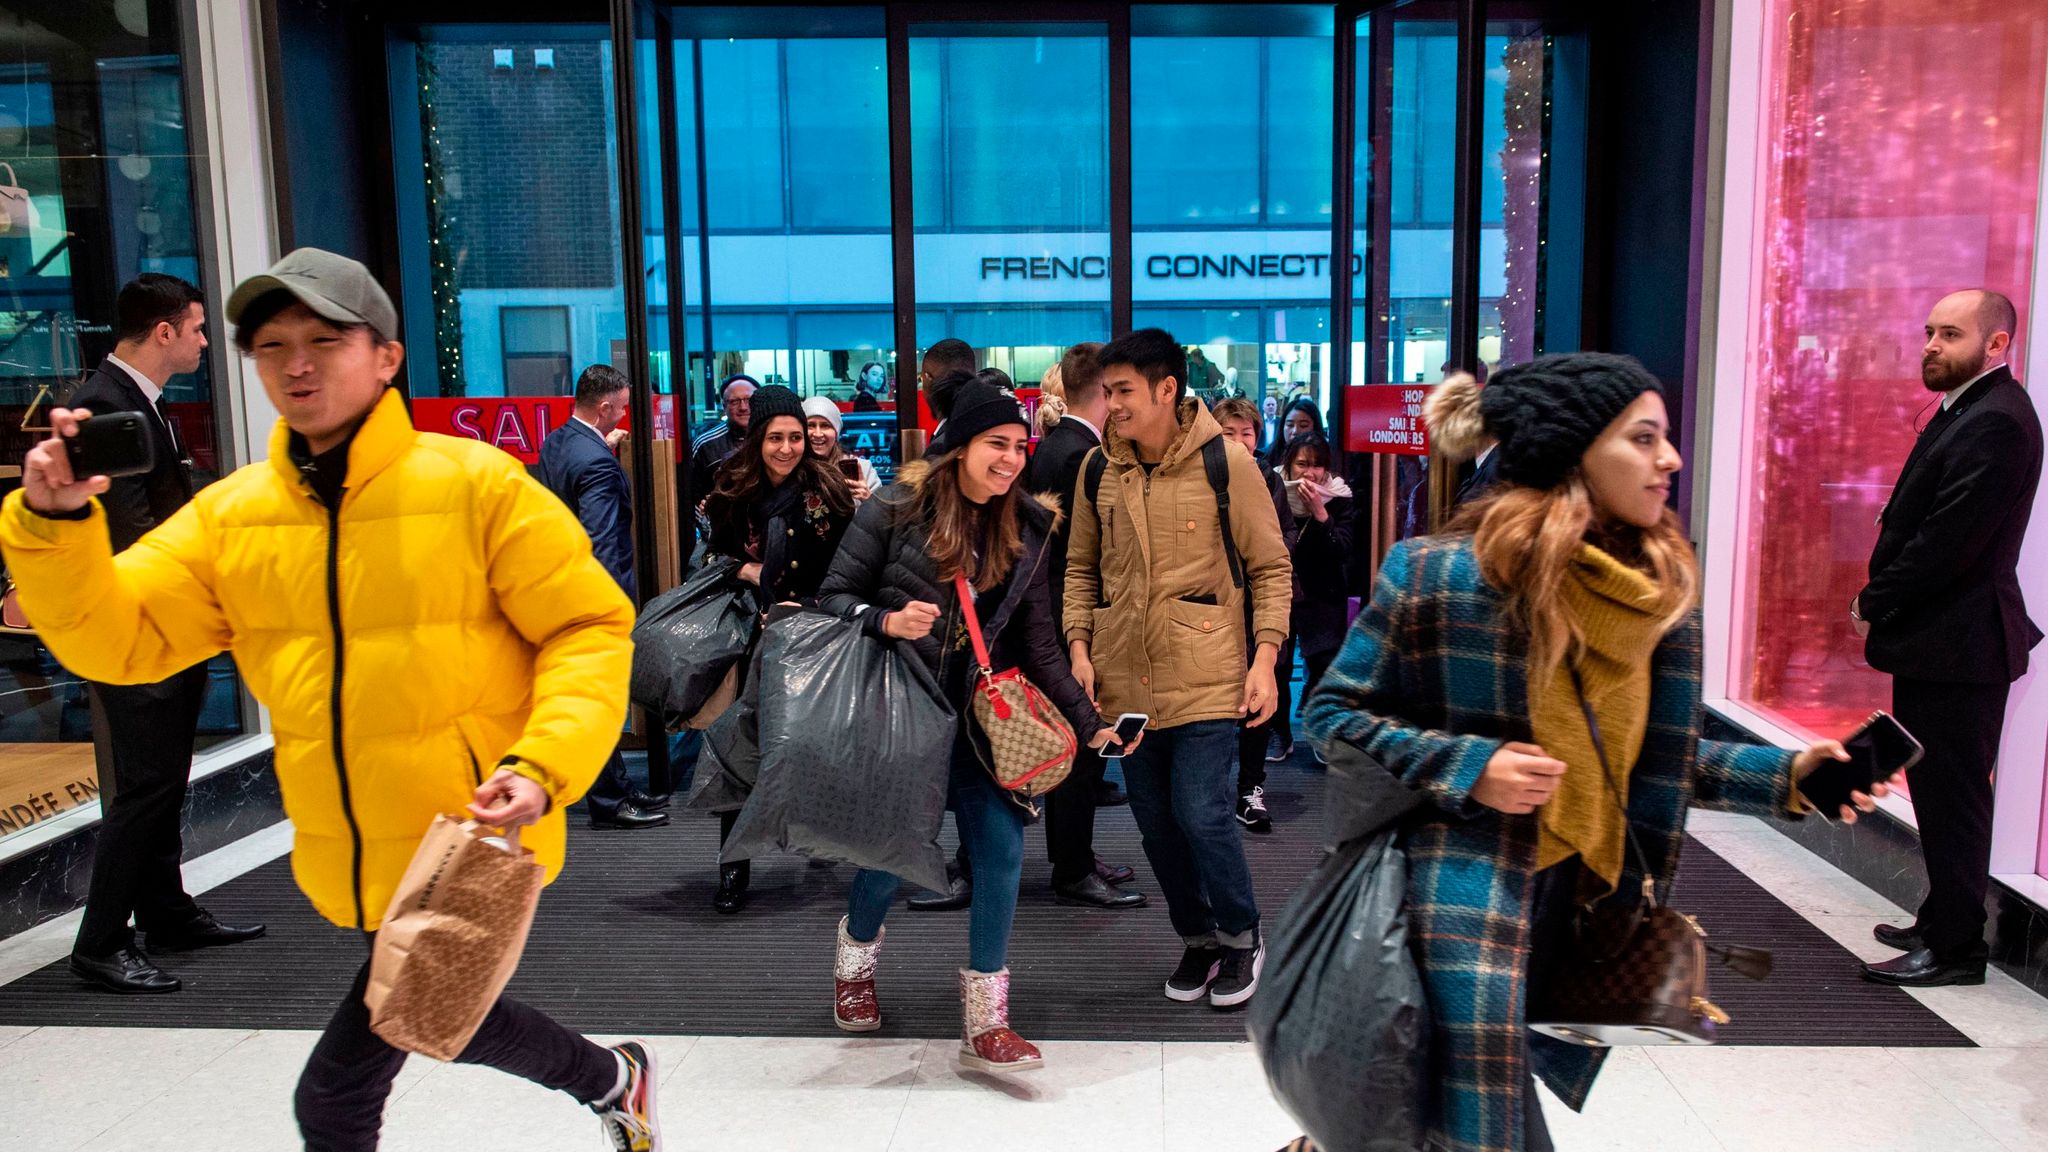 Boxing Day sales Prices slashed but footfall declines across UK UK